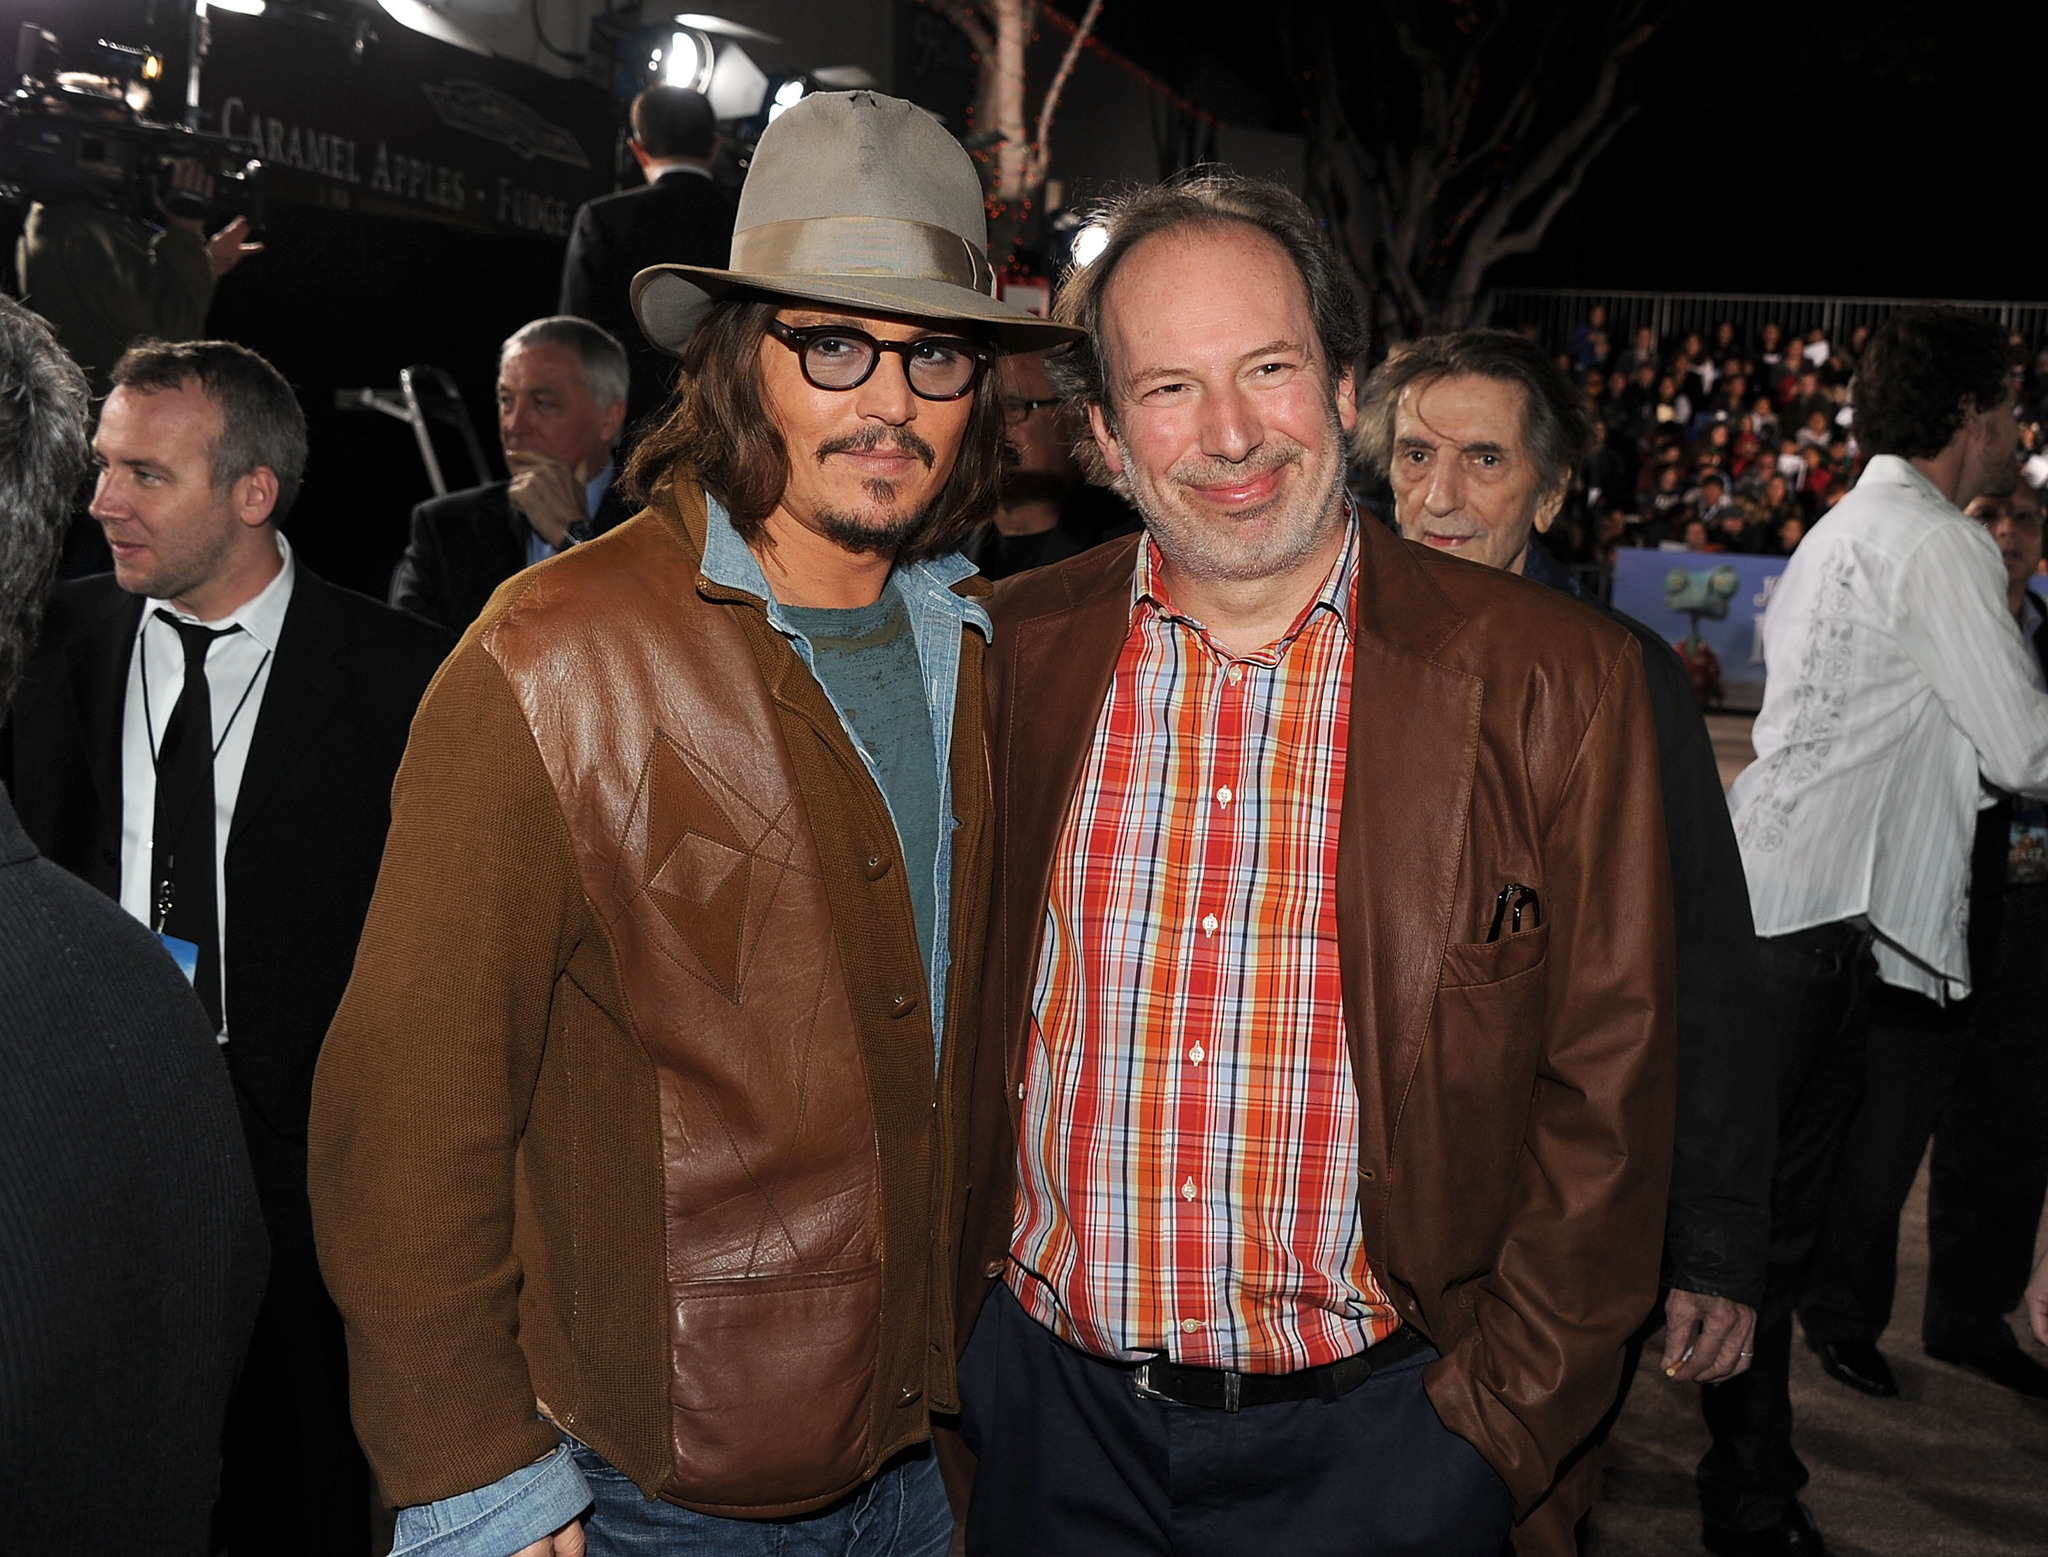 Johnny Depp and Hans Zimmer at event of Rango (2011)